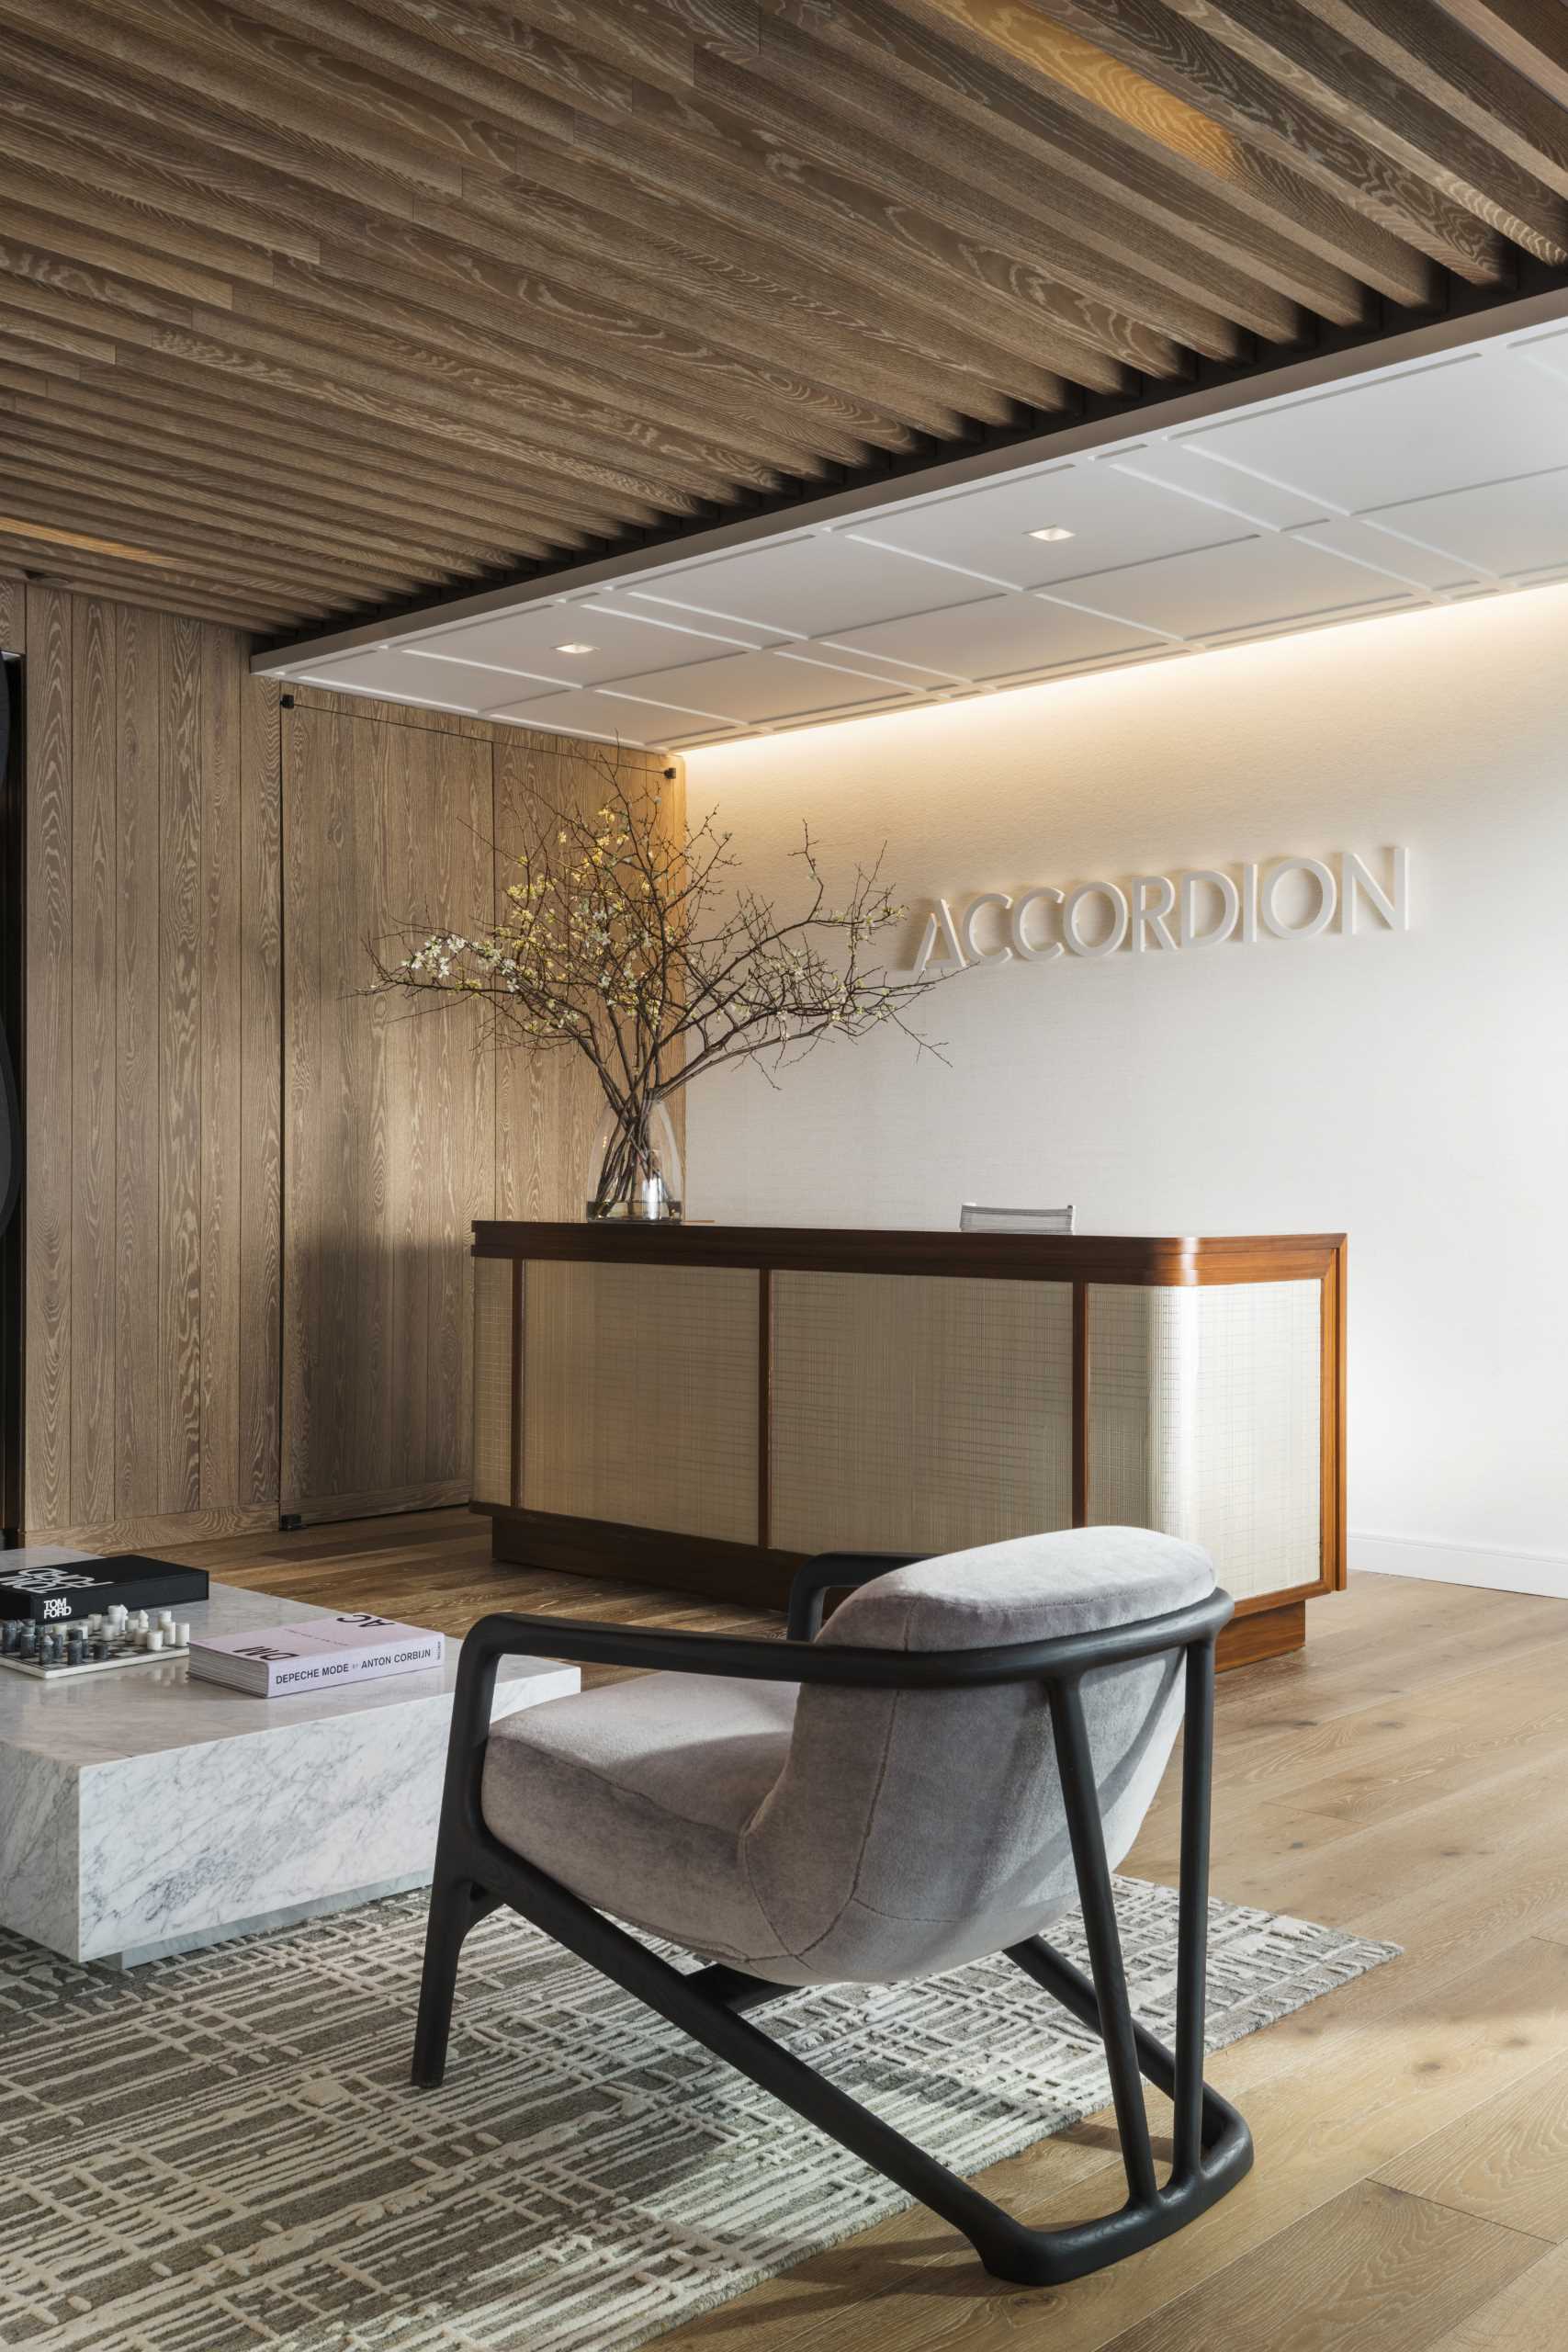 A modern reception area with a warm wood and white palette.